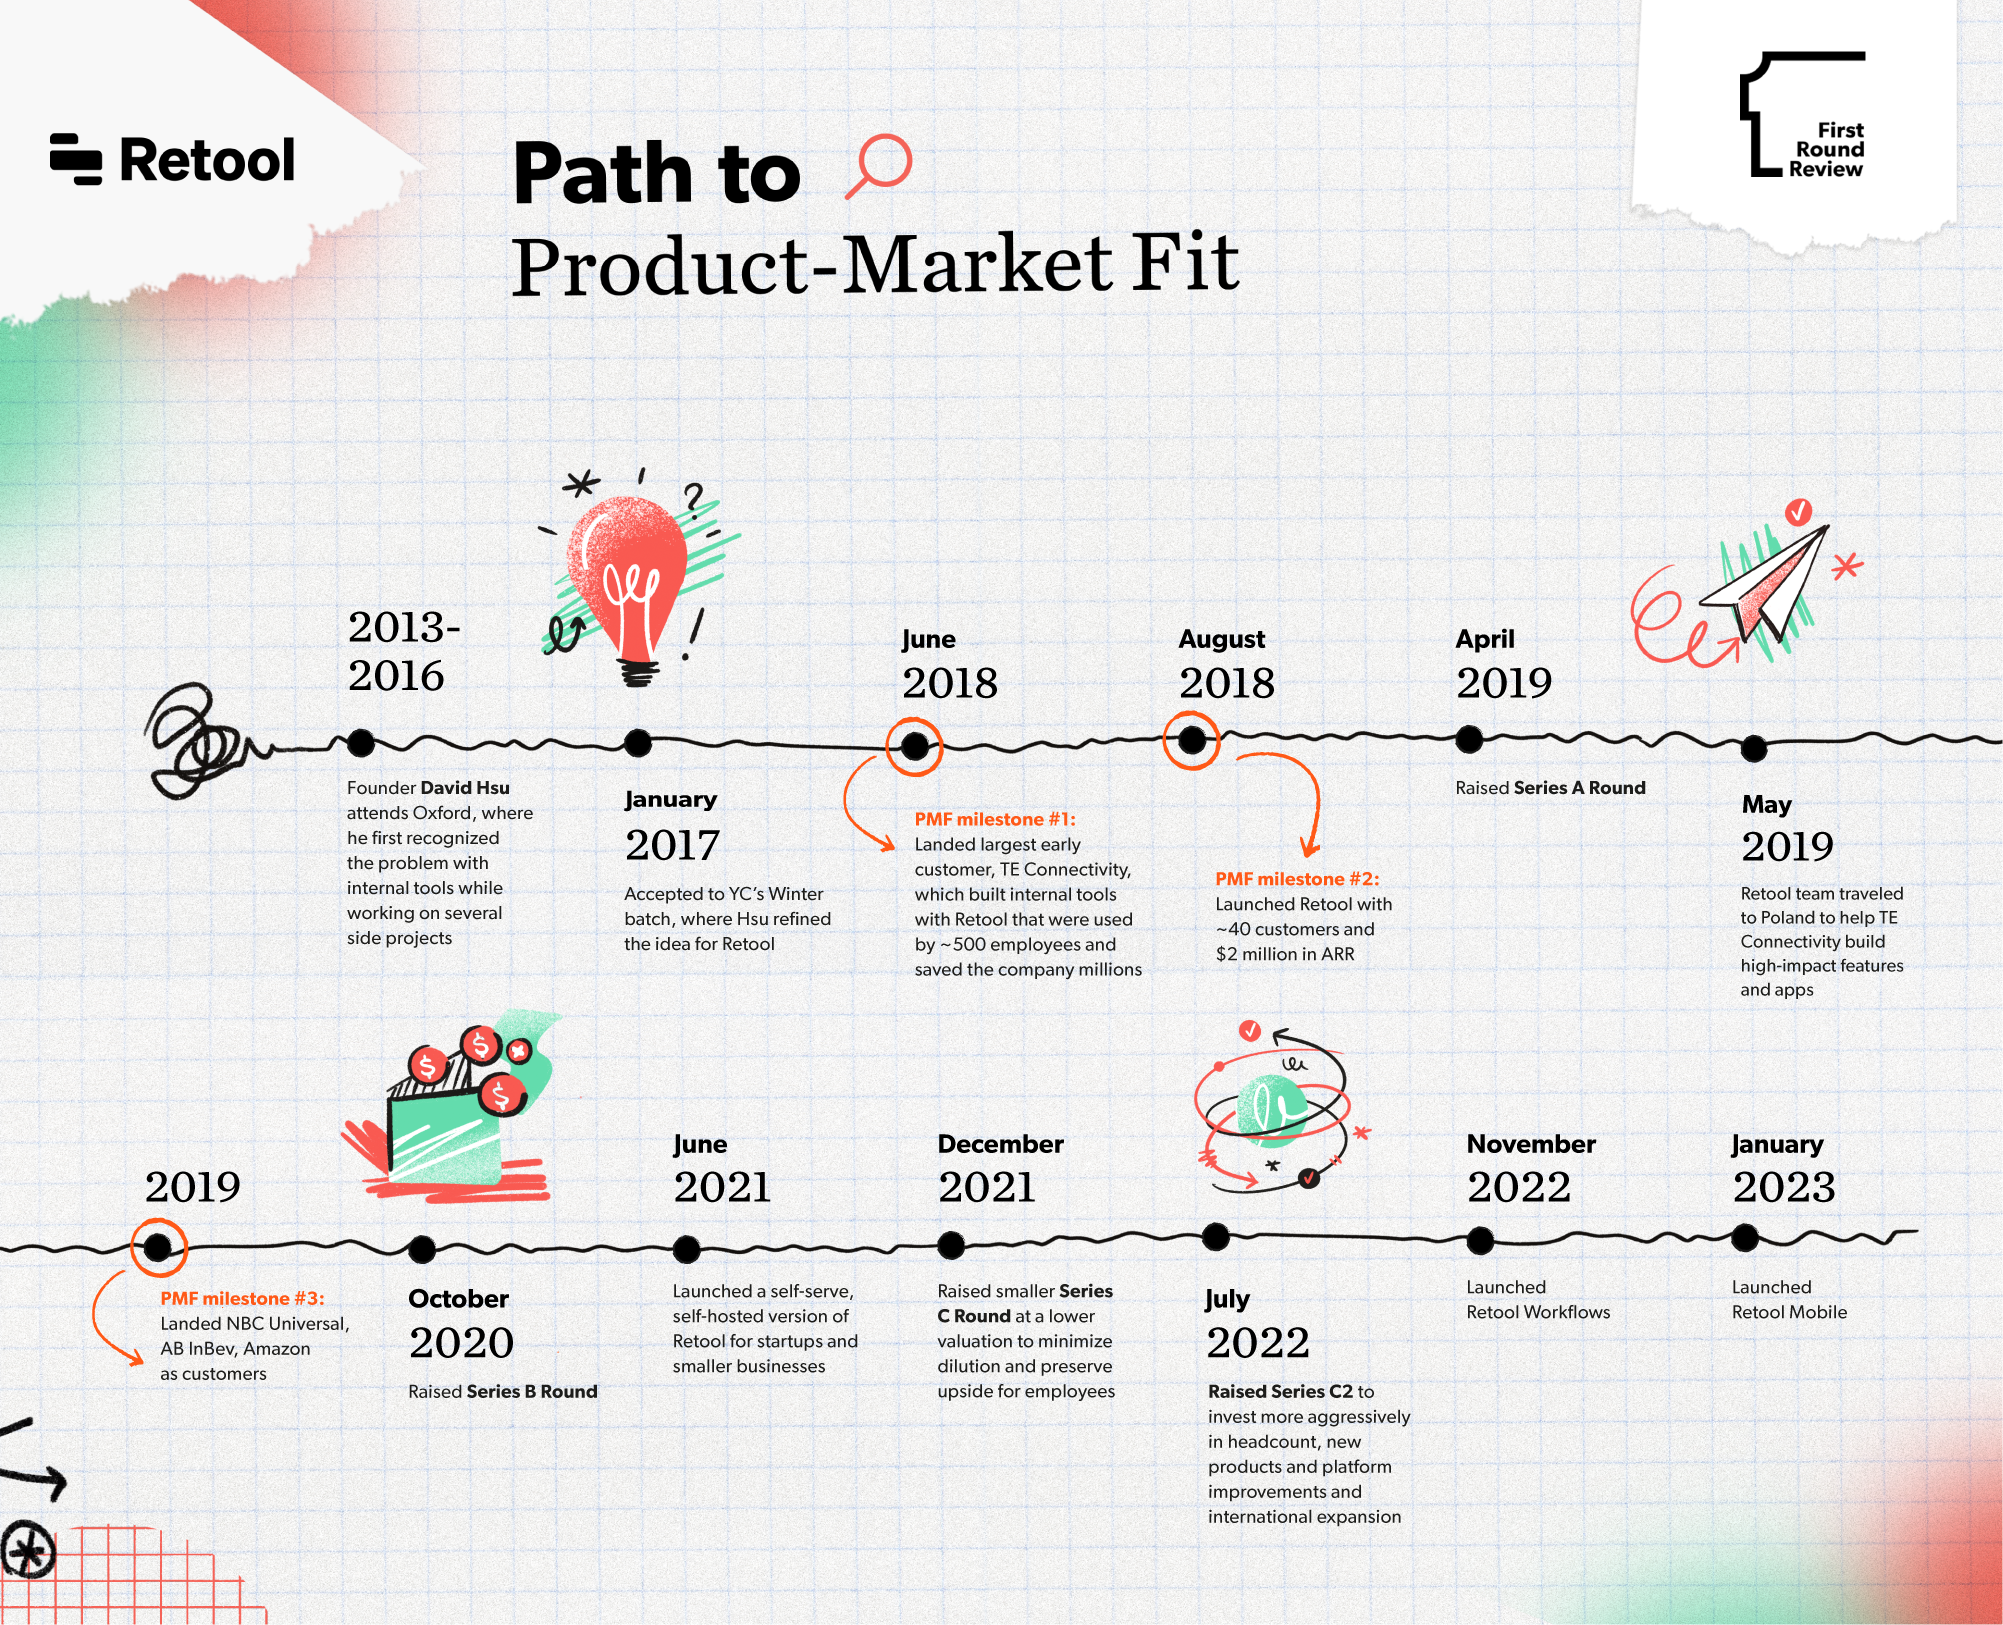 Image of Retool's timeline to product-market fit